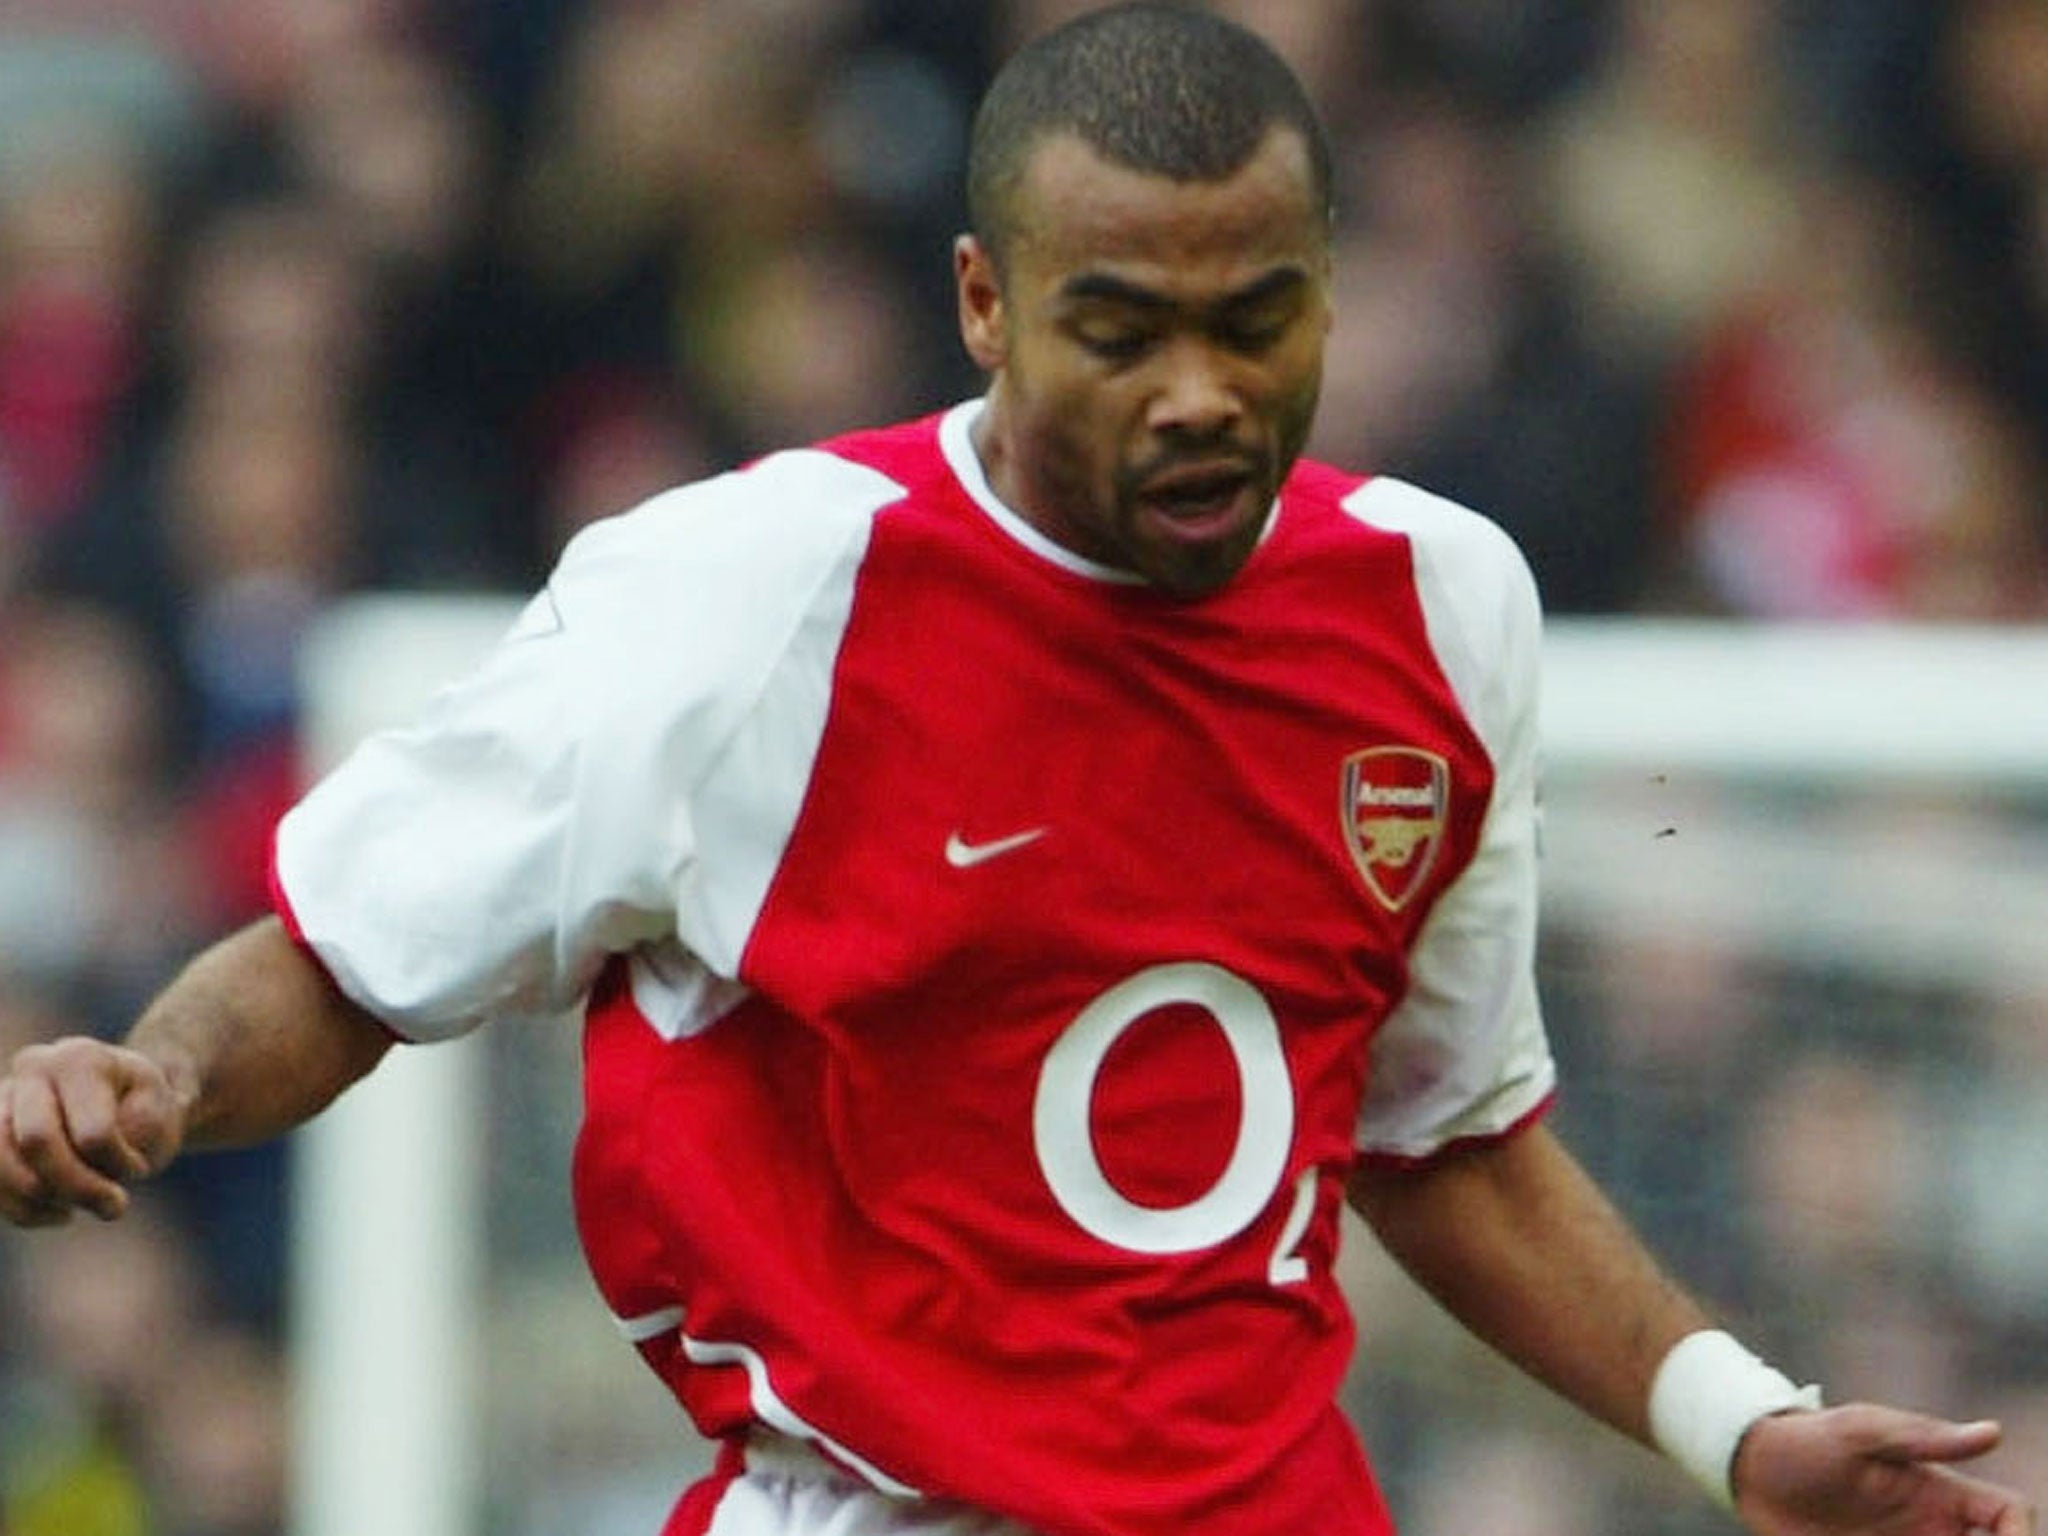 Ashley Cole couldn't rejoin Arsenal, could he?